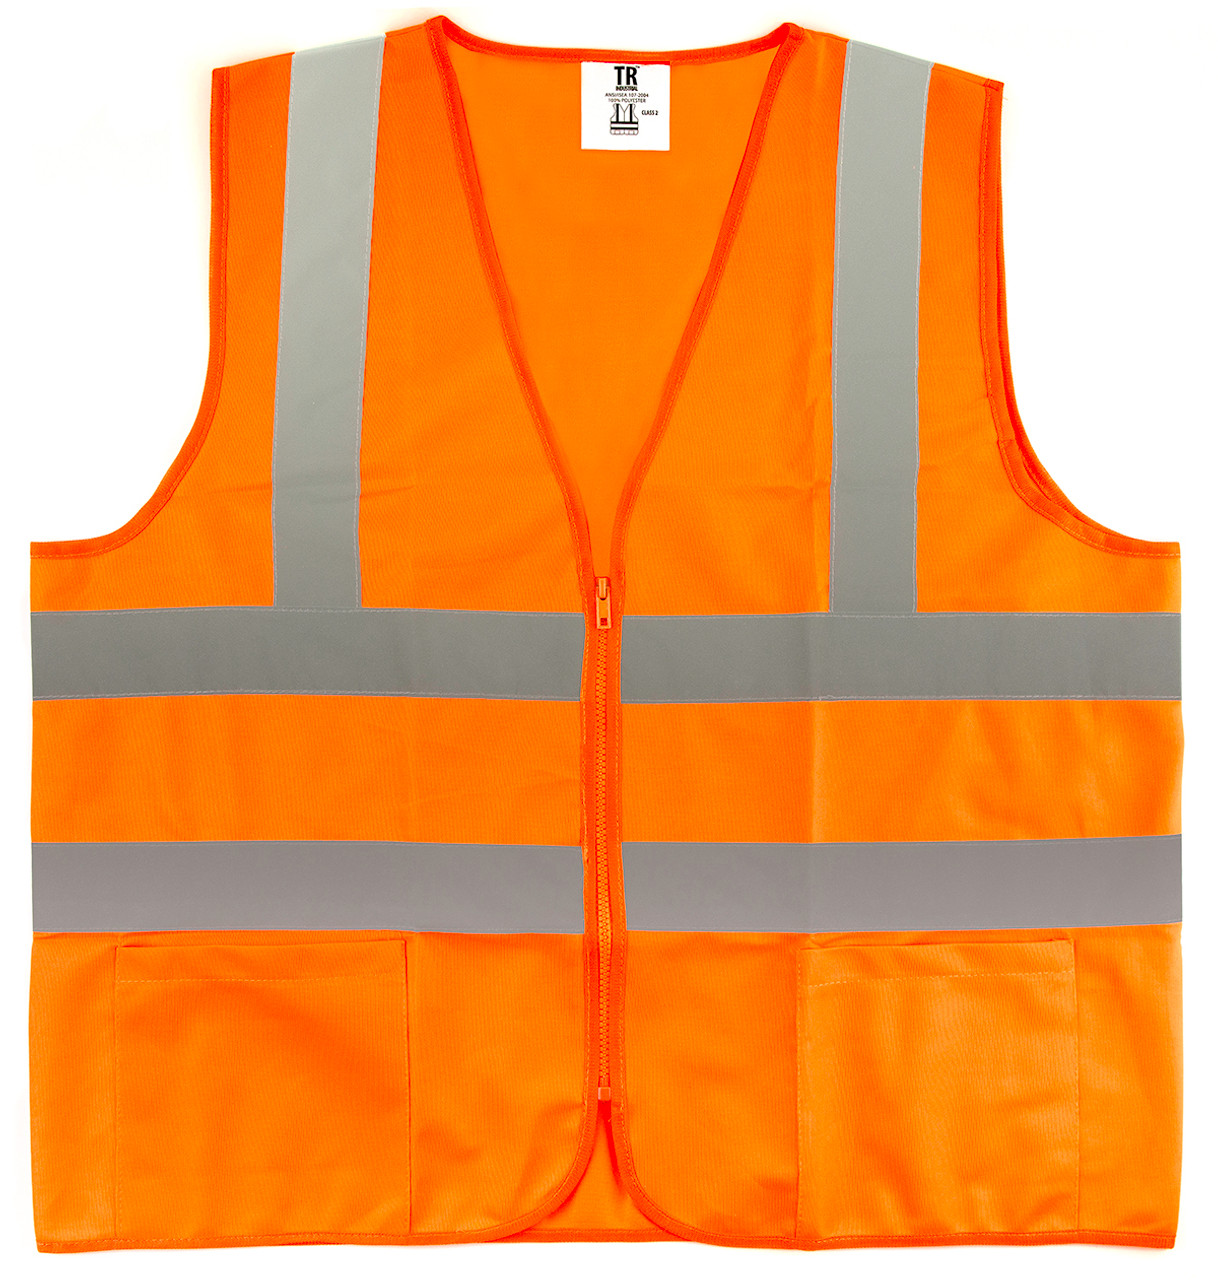 TR Industrial Orange High Visibility Reflective Class 2 Safety Vest, 2 Pockets, Knitted, Size 5XL